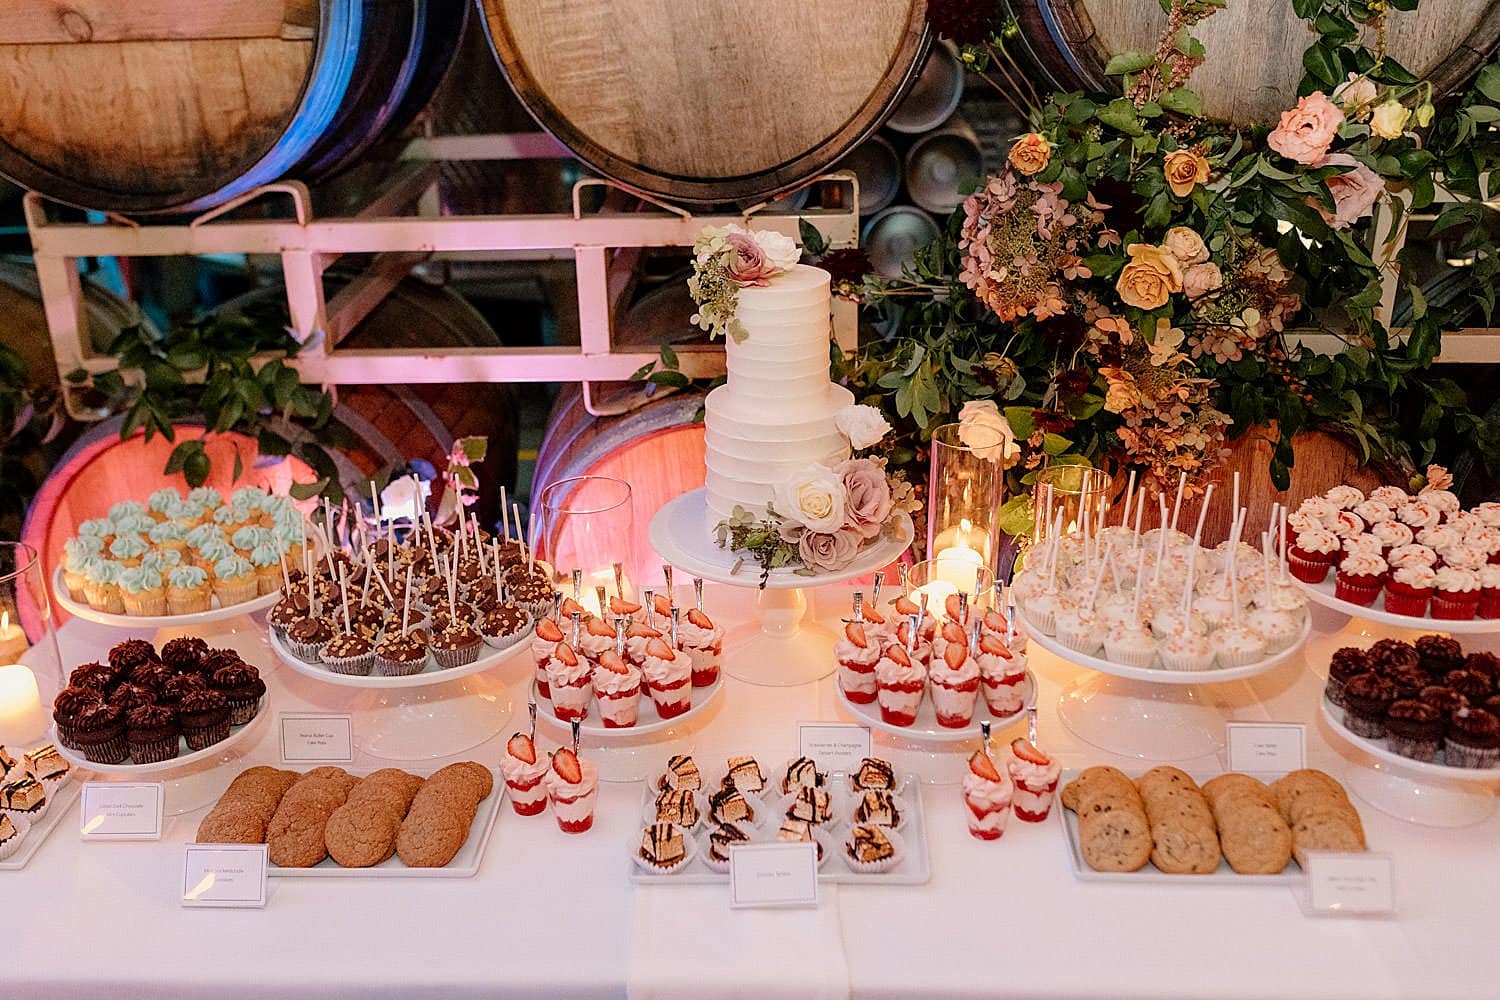 A wedding cake and dessert display at Coopers Hall in Portland.